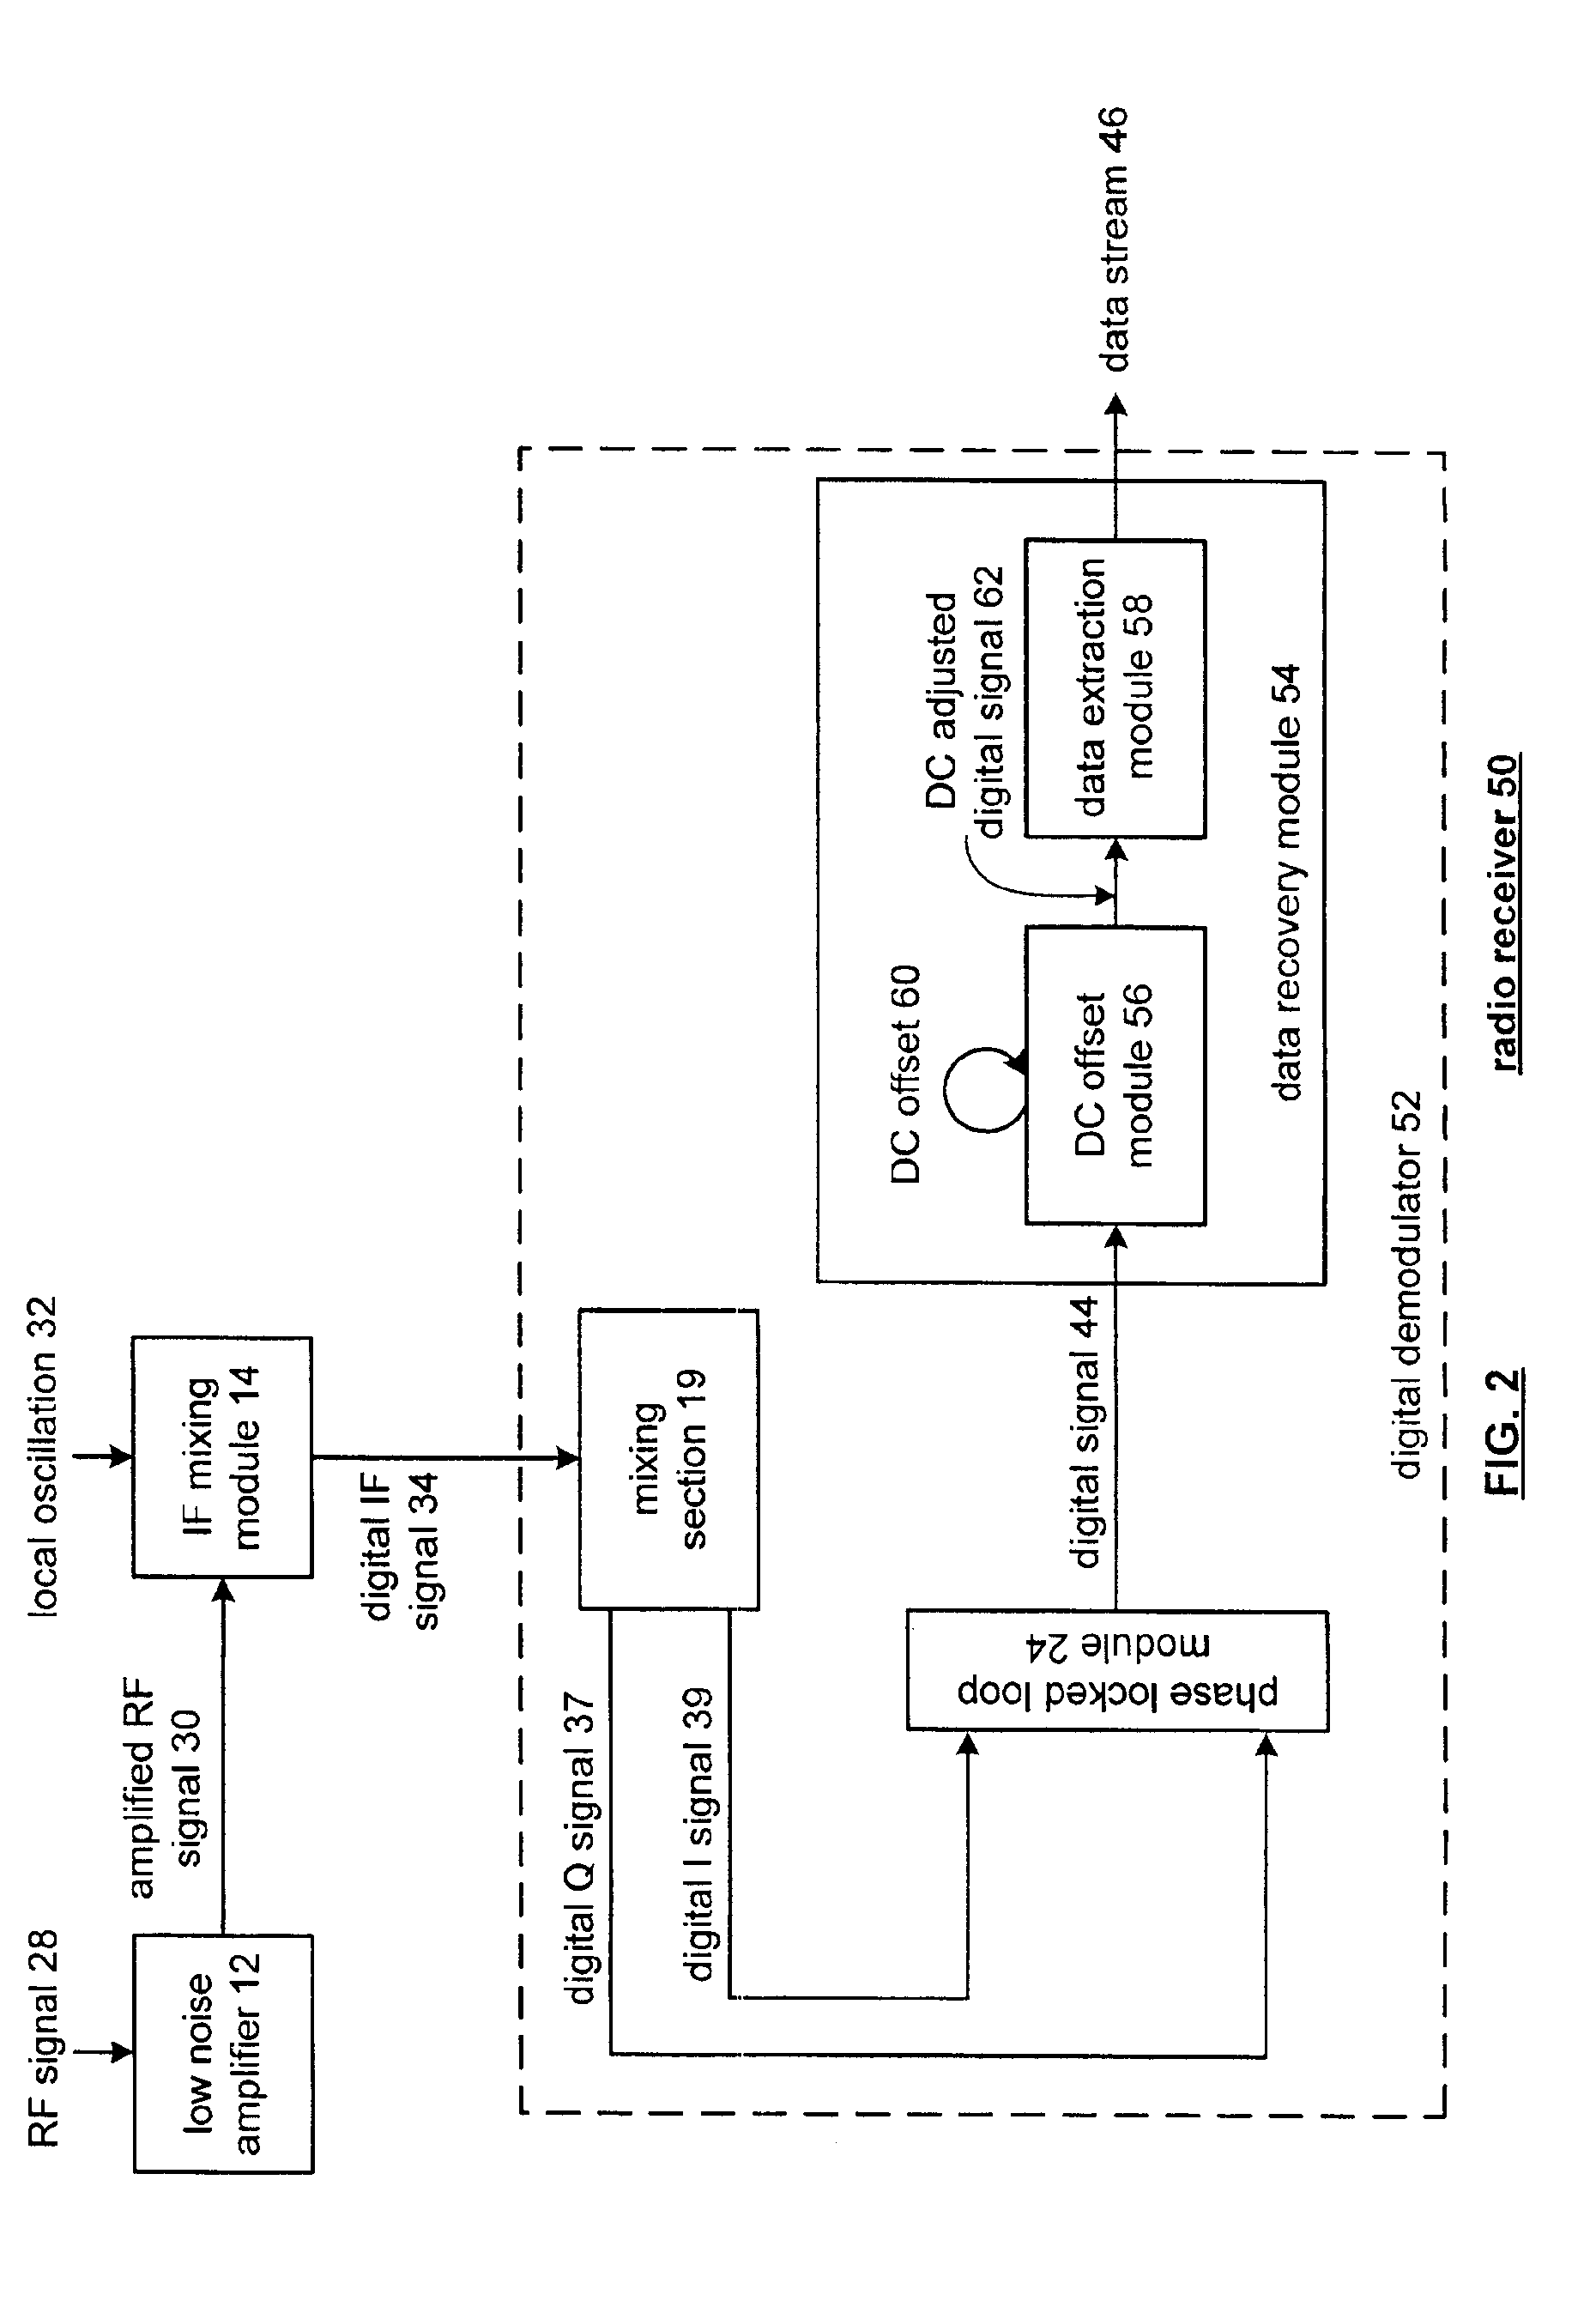 Digital demodulation and applications thereof